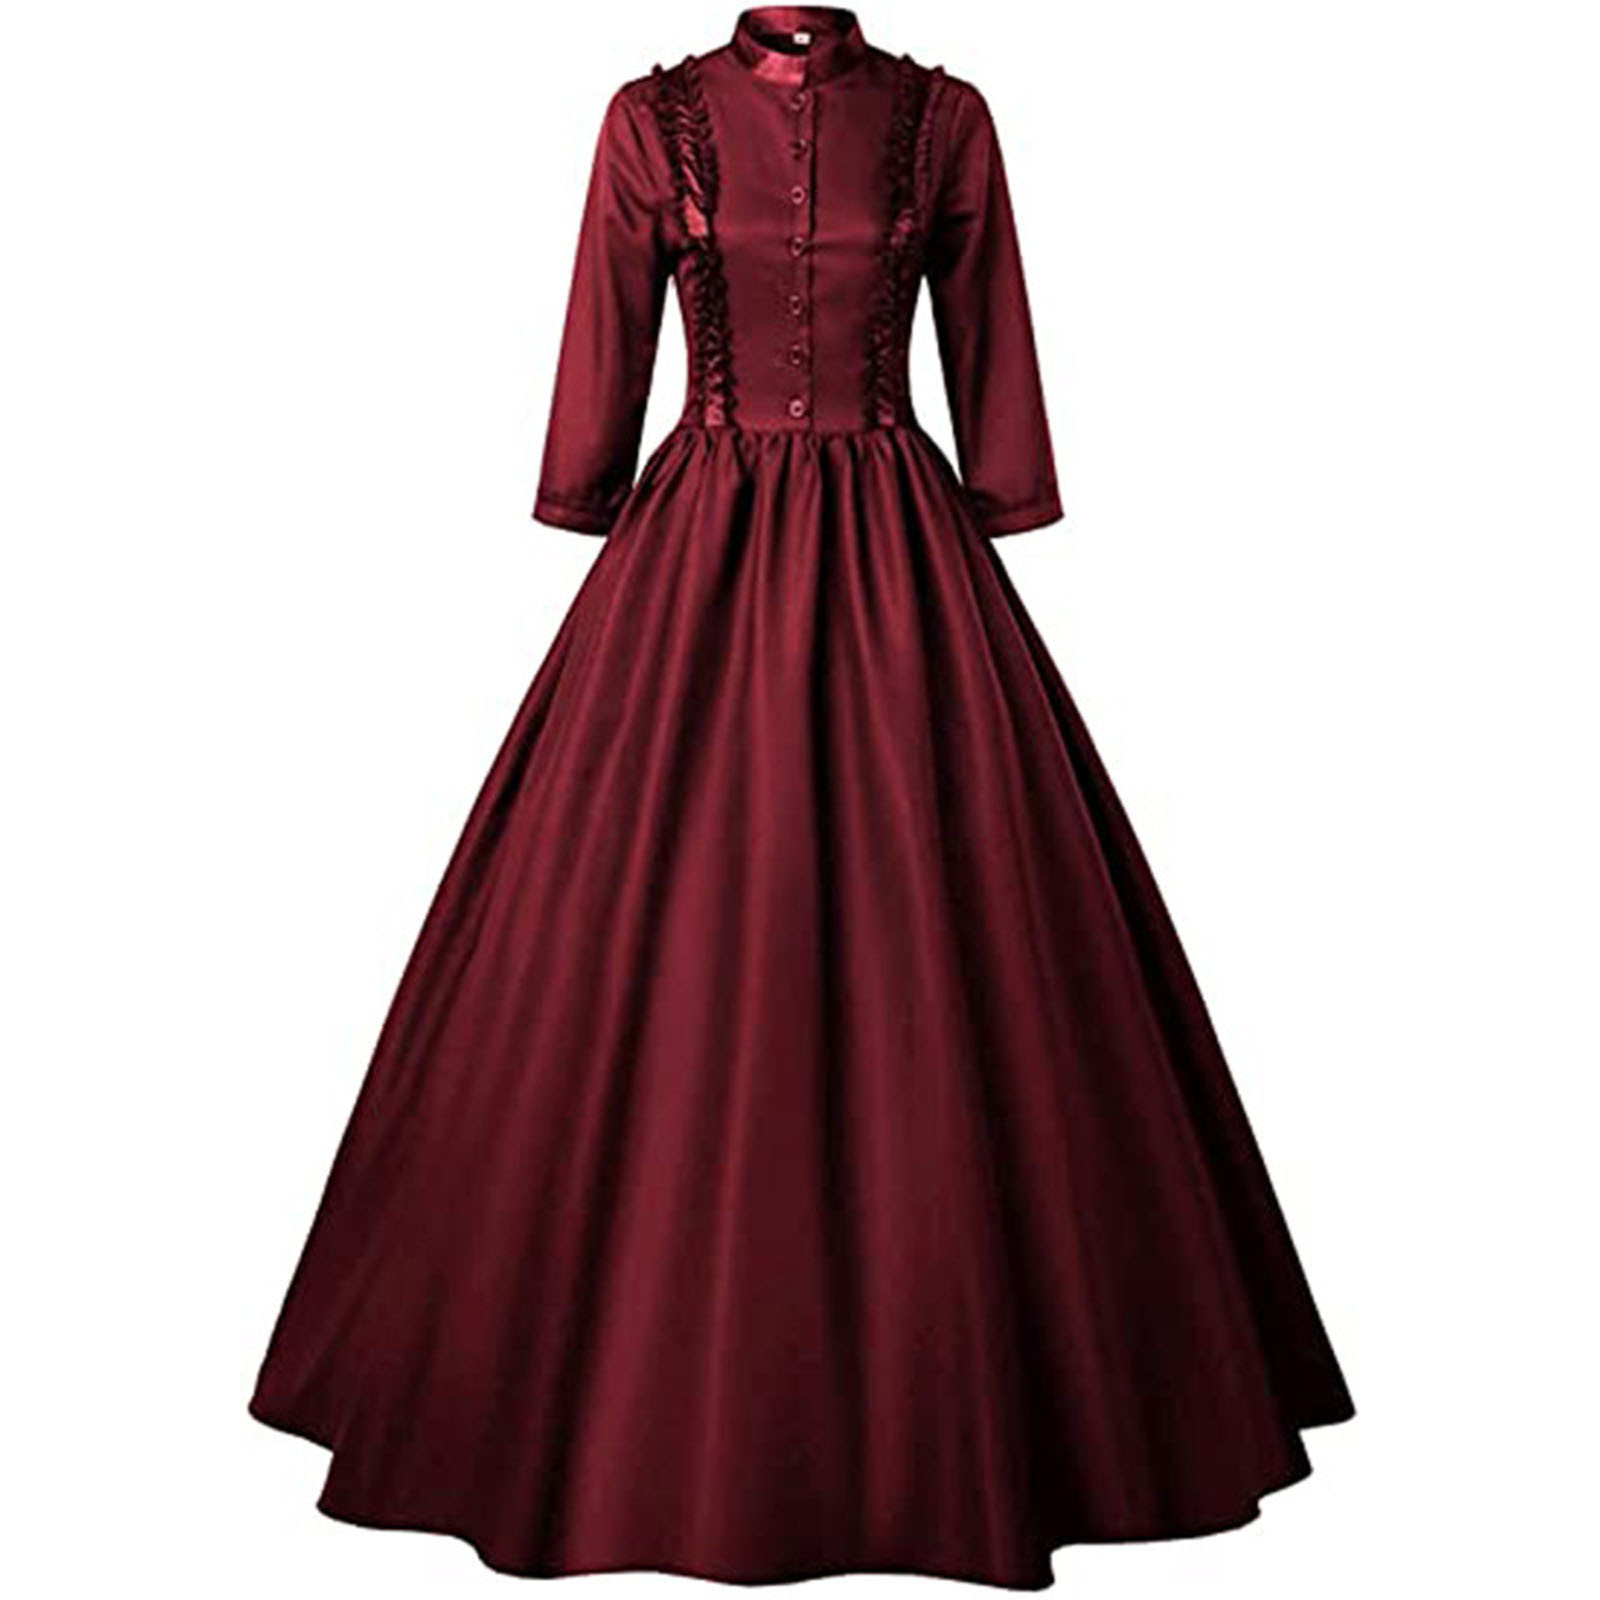 Gosuguu Clearance Dress Women's Medieval Costume Retro Renaissance Long  Sleeve Round Neck Flowy Vintage Prom Dresses # Sales and Deals Today Prime  Wine XL 